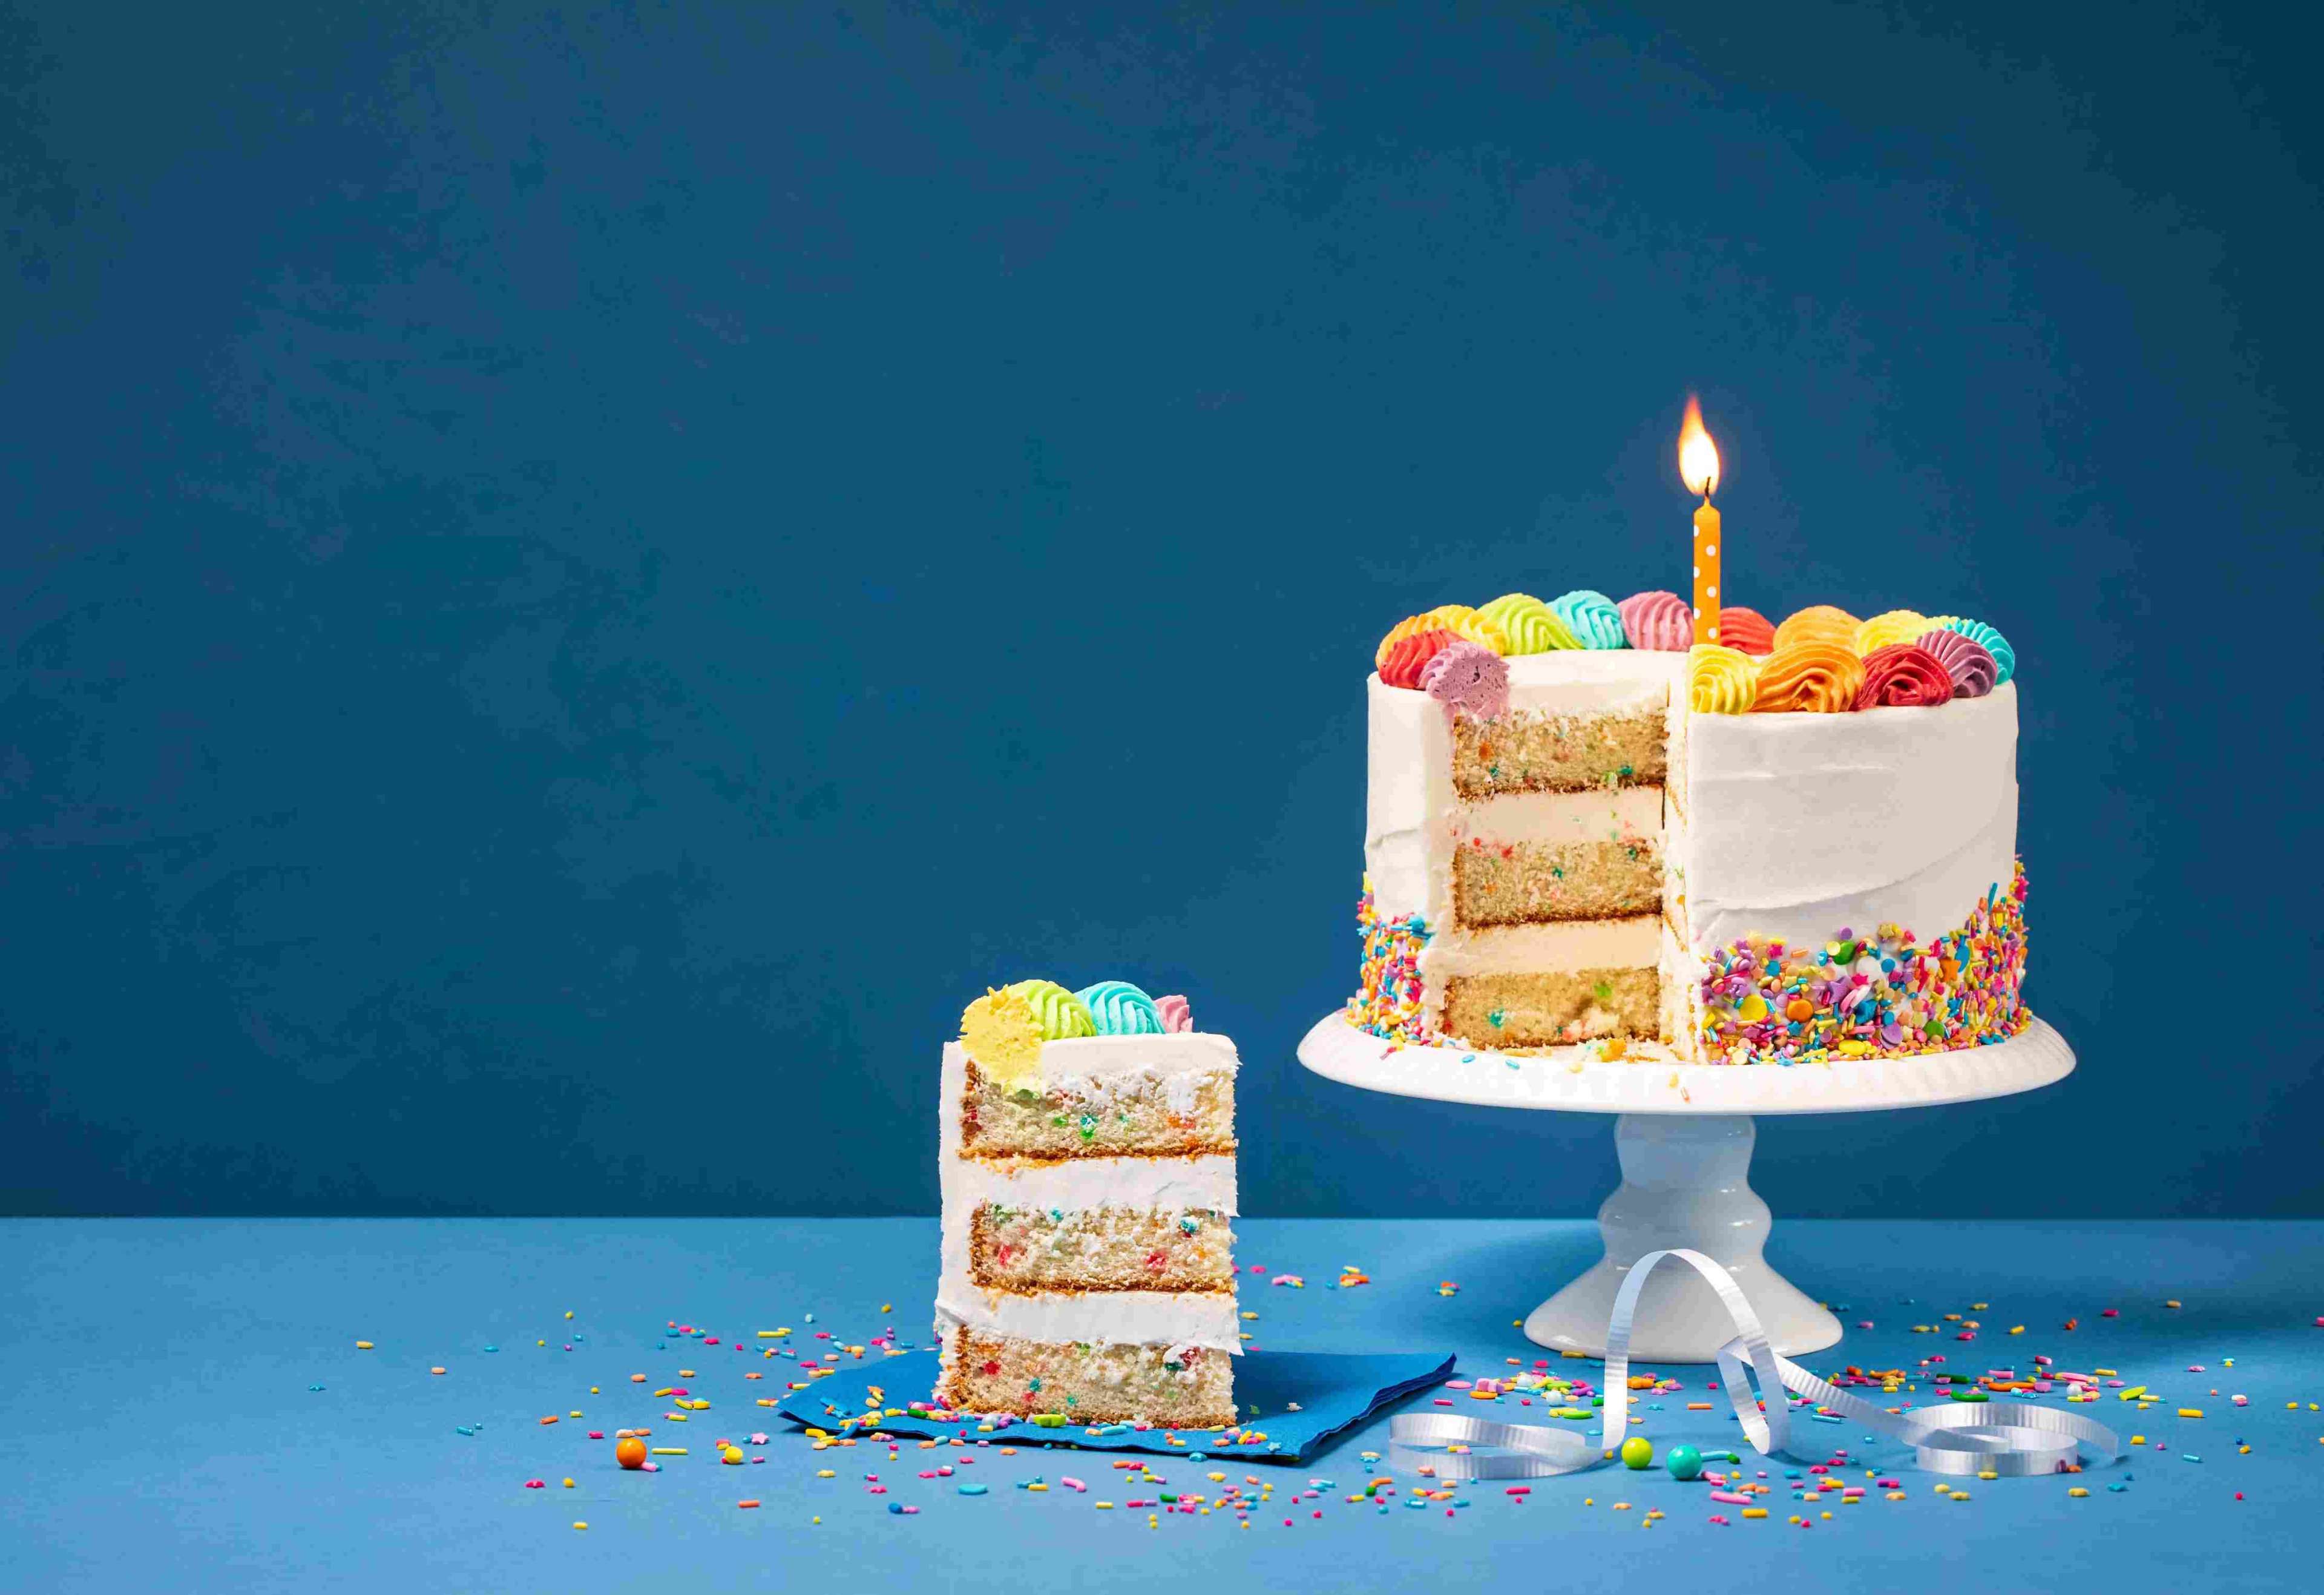 61a1420cc3249d0b0c557585_Colorful%20Birthday%20Cake%20with%20Slice%20and%20Sprinkles%20on%20Blue%20background.jpeg